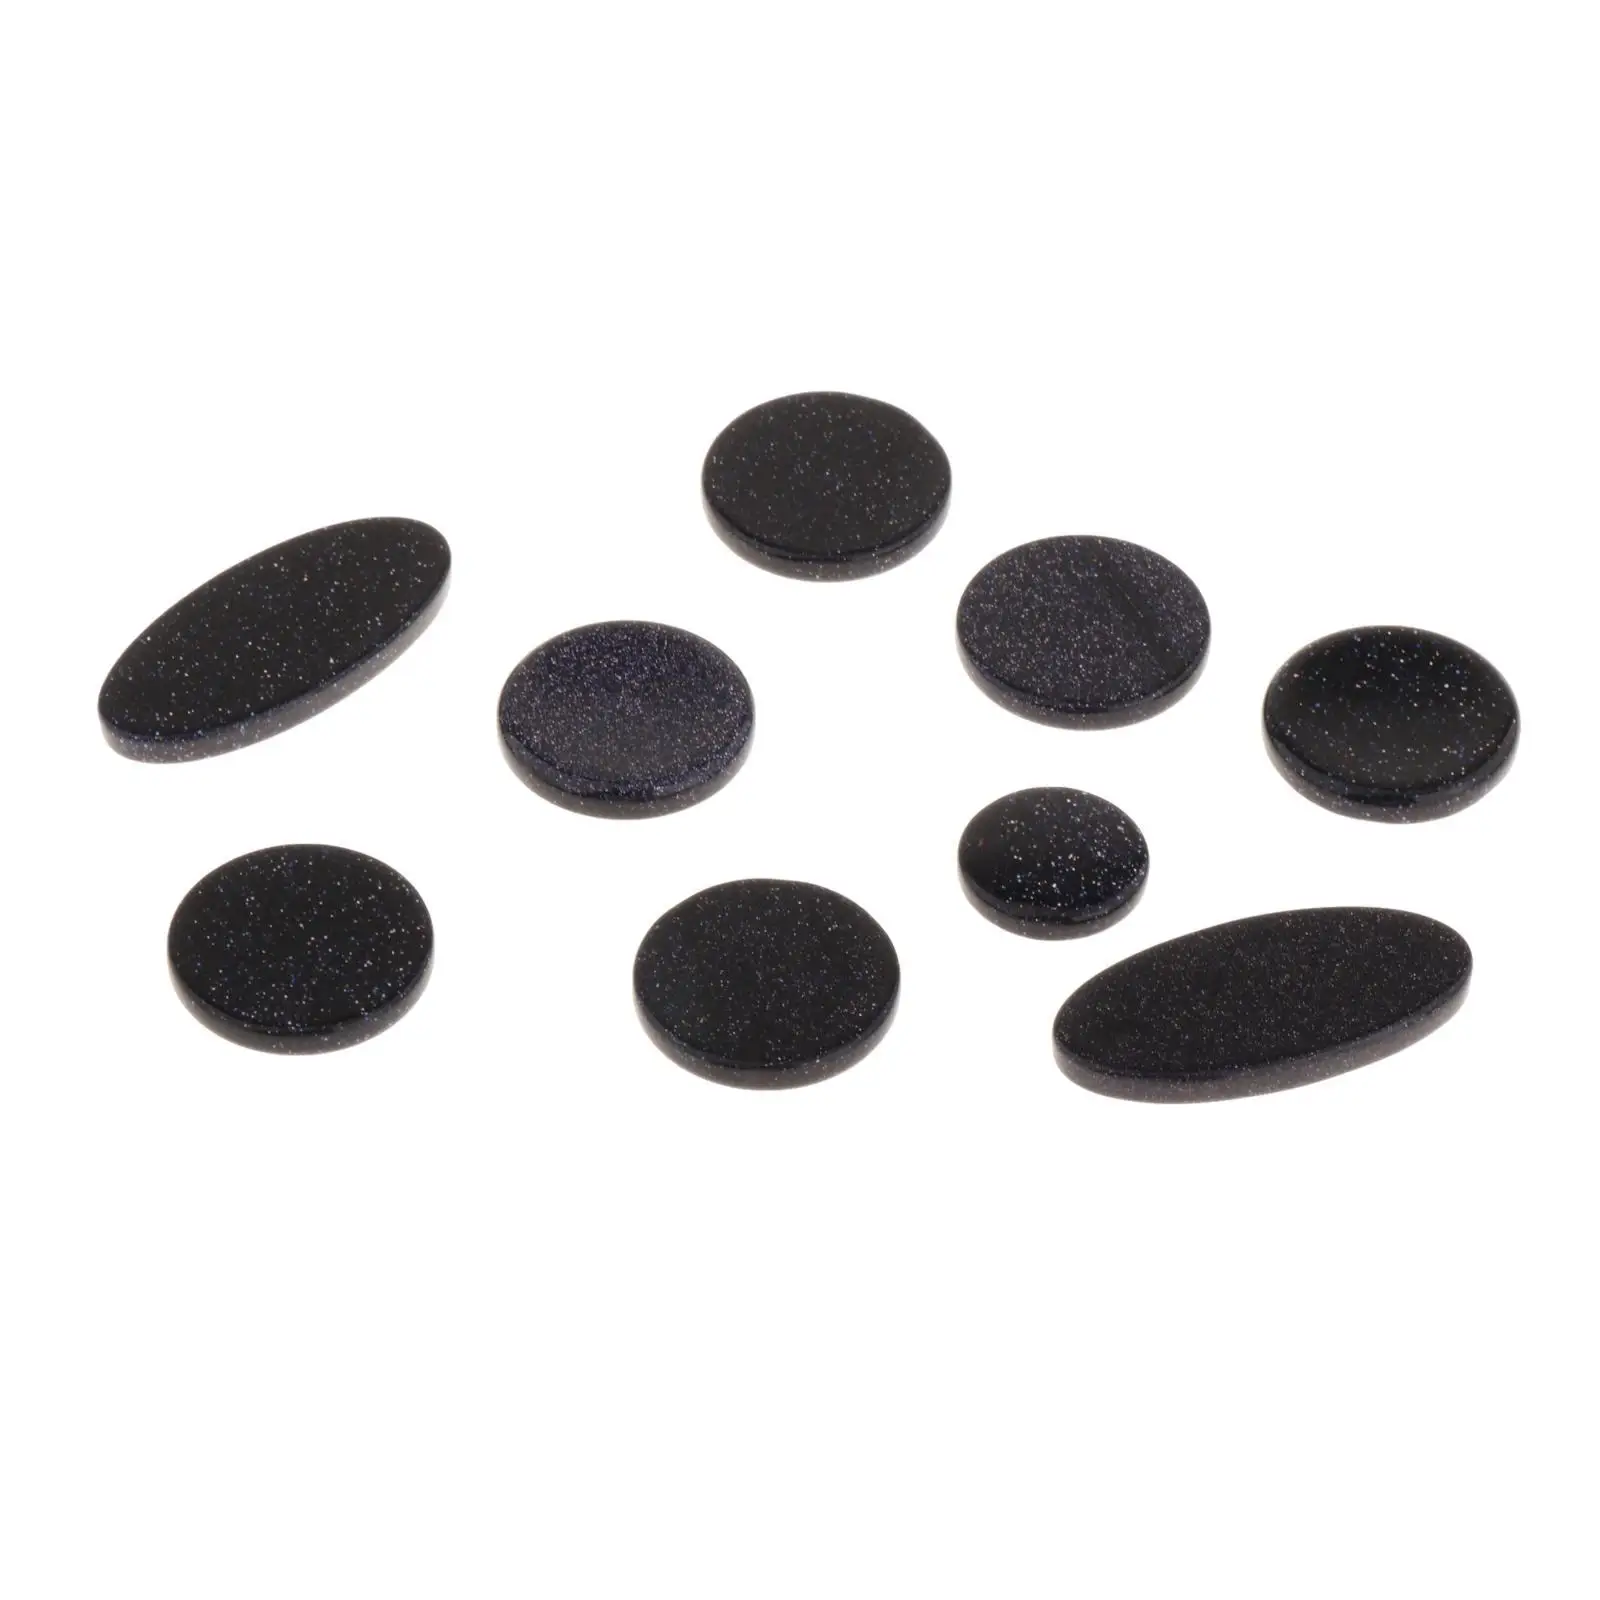 Saxophone Finger Buttons Exquisite Inlays Accessories Replacement for